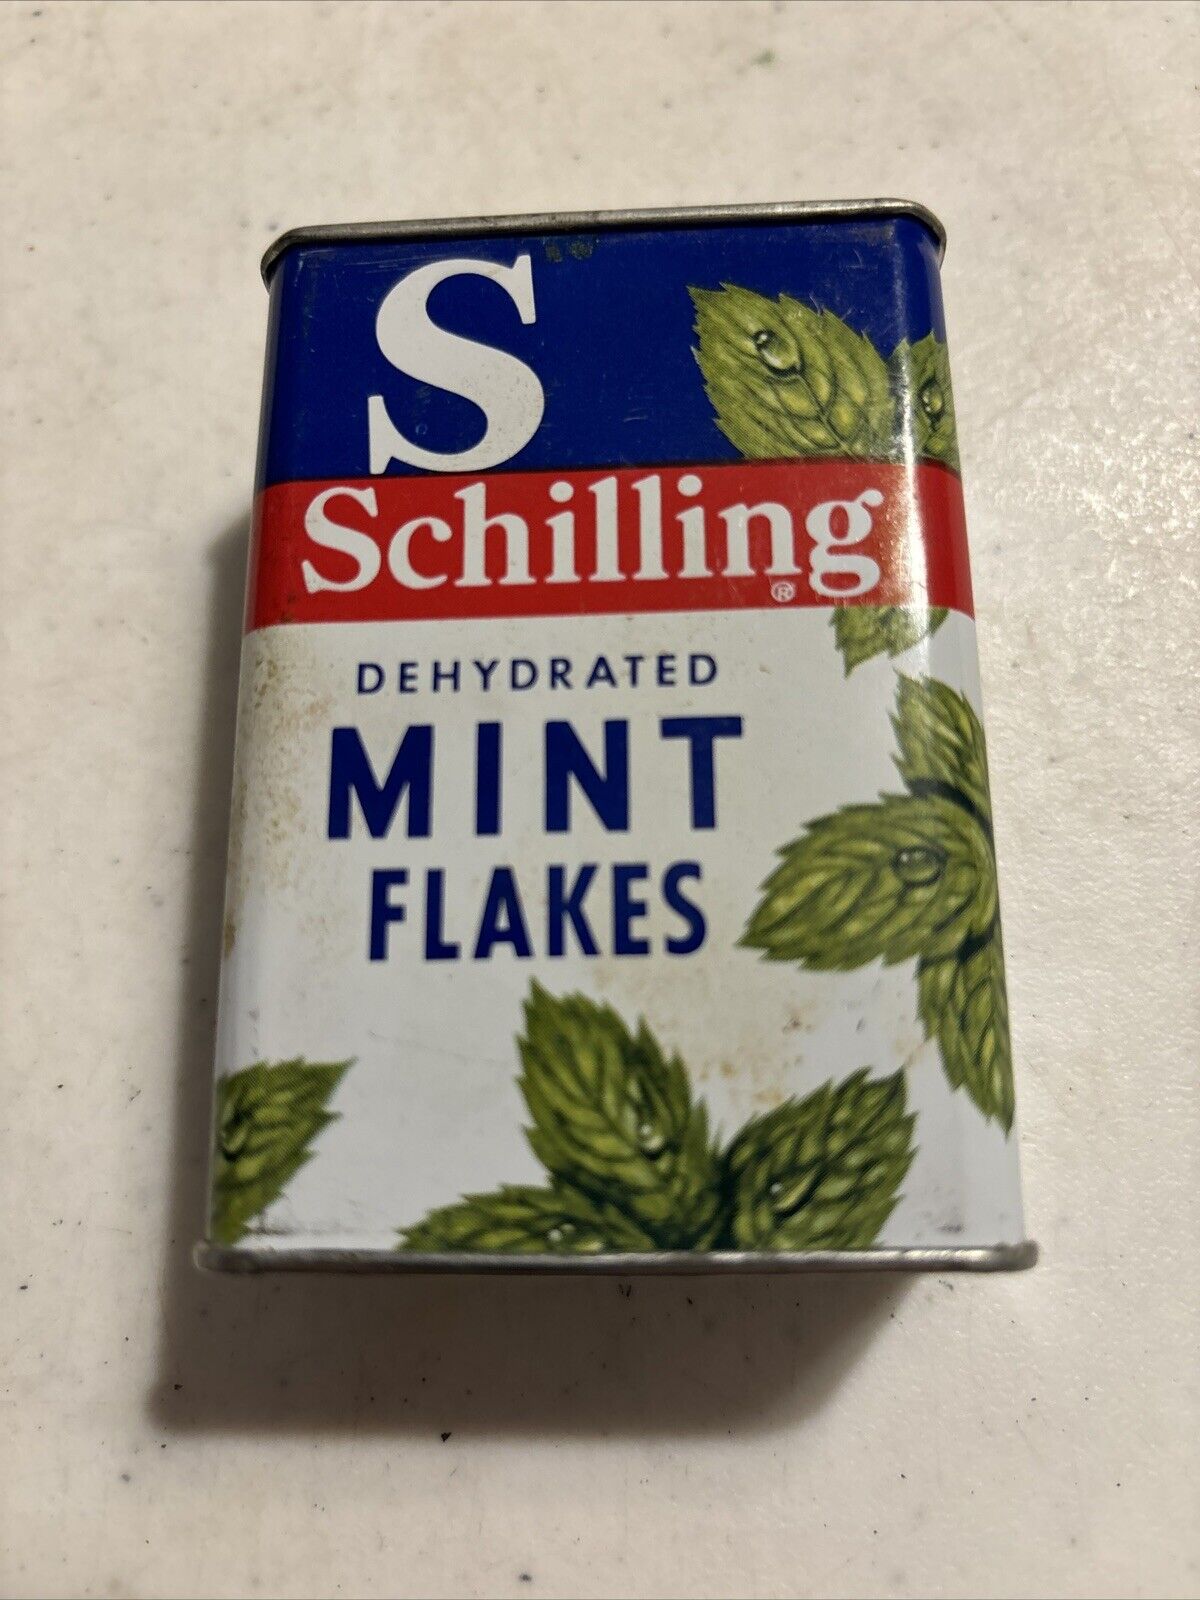 VINTAGE Schilling Dehydrated Mint Flakes Metal Spice Tin